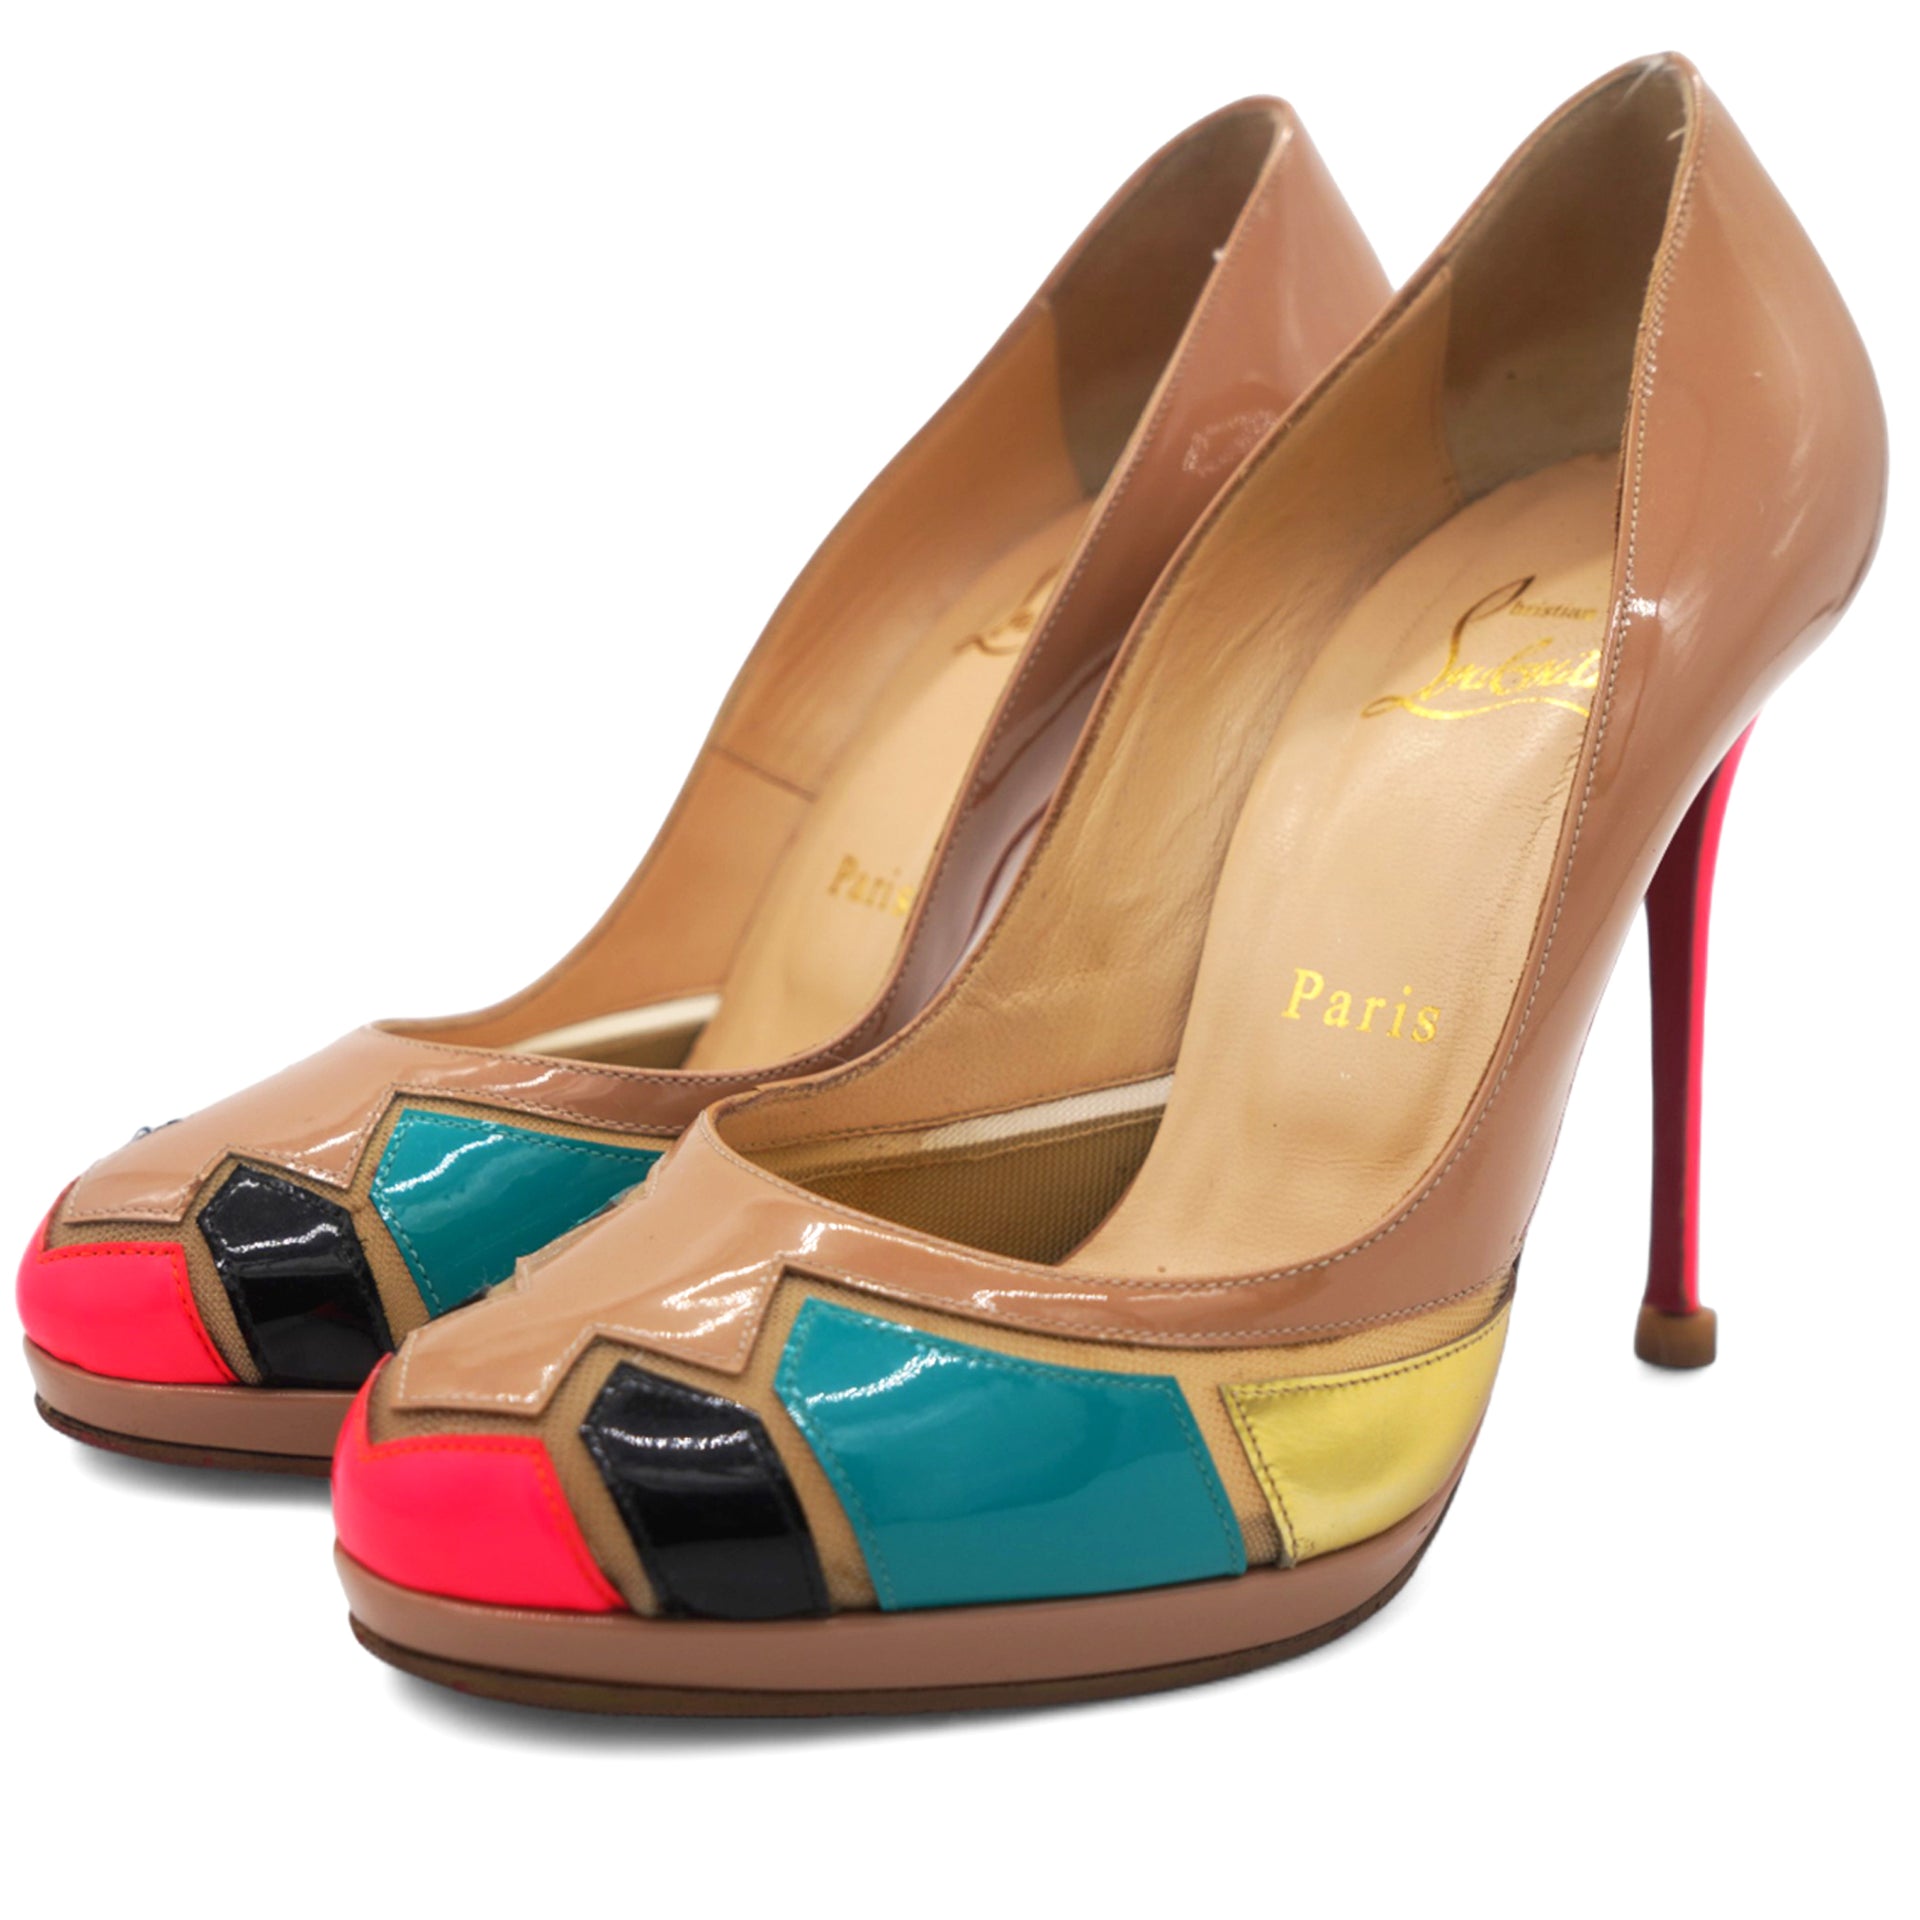 Multicolor Patchwork Patent Leather Astrogirl Pumps 37